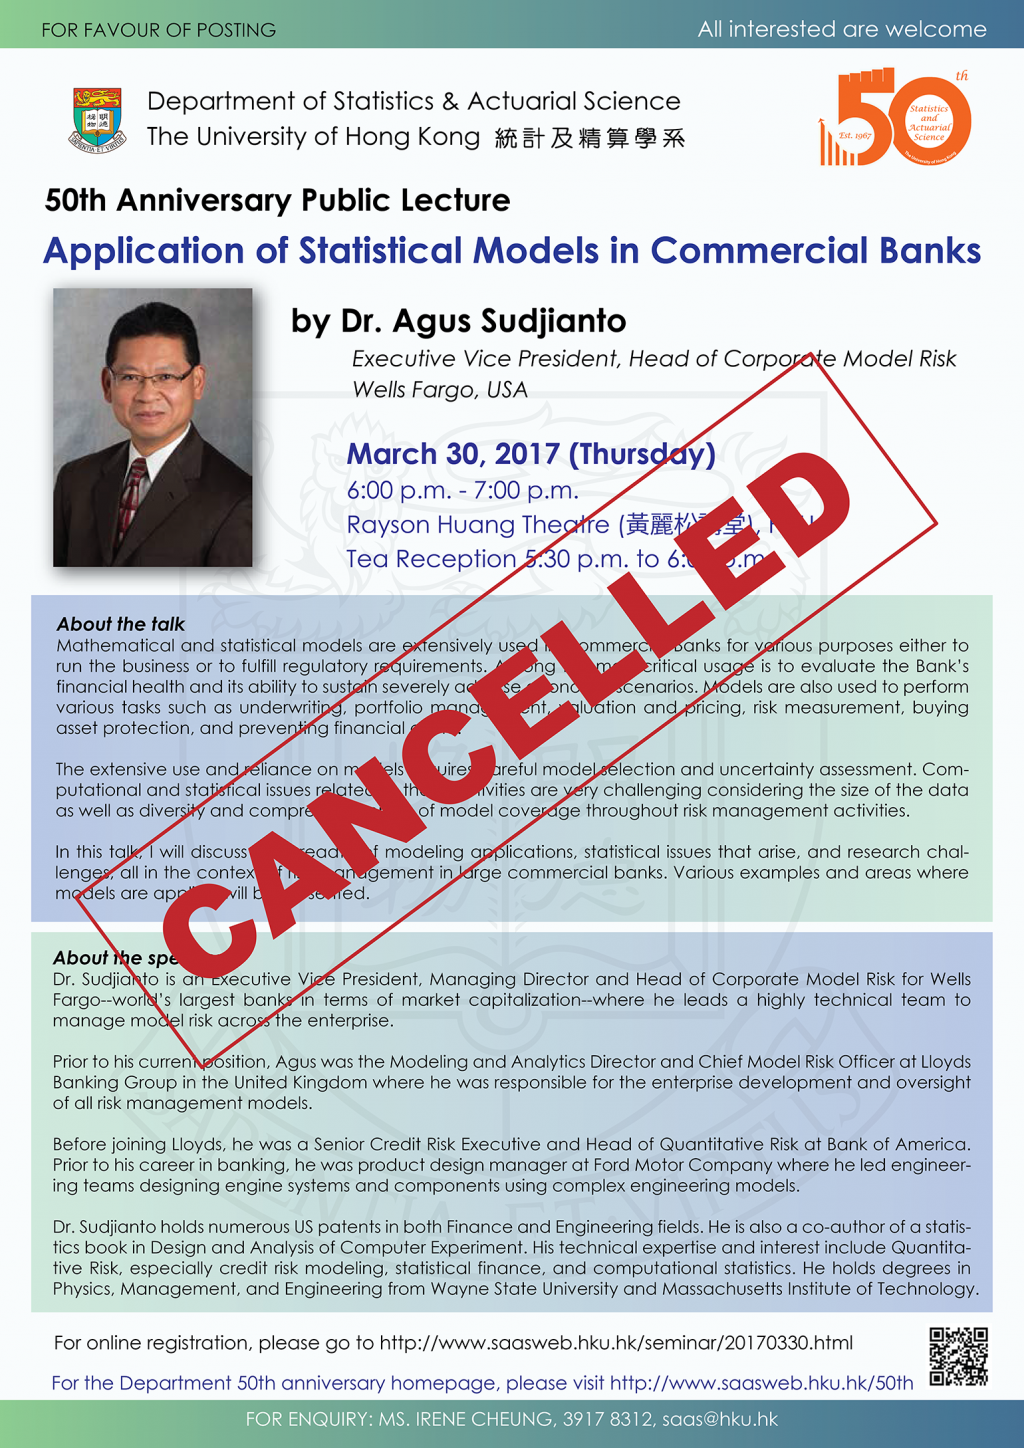 CANCELLED: 50th Anniversary Public Lecture on 'Application of Statistical Models in Commercial Banks' by Dr. Agus Sudjianto on March 30, 2017